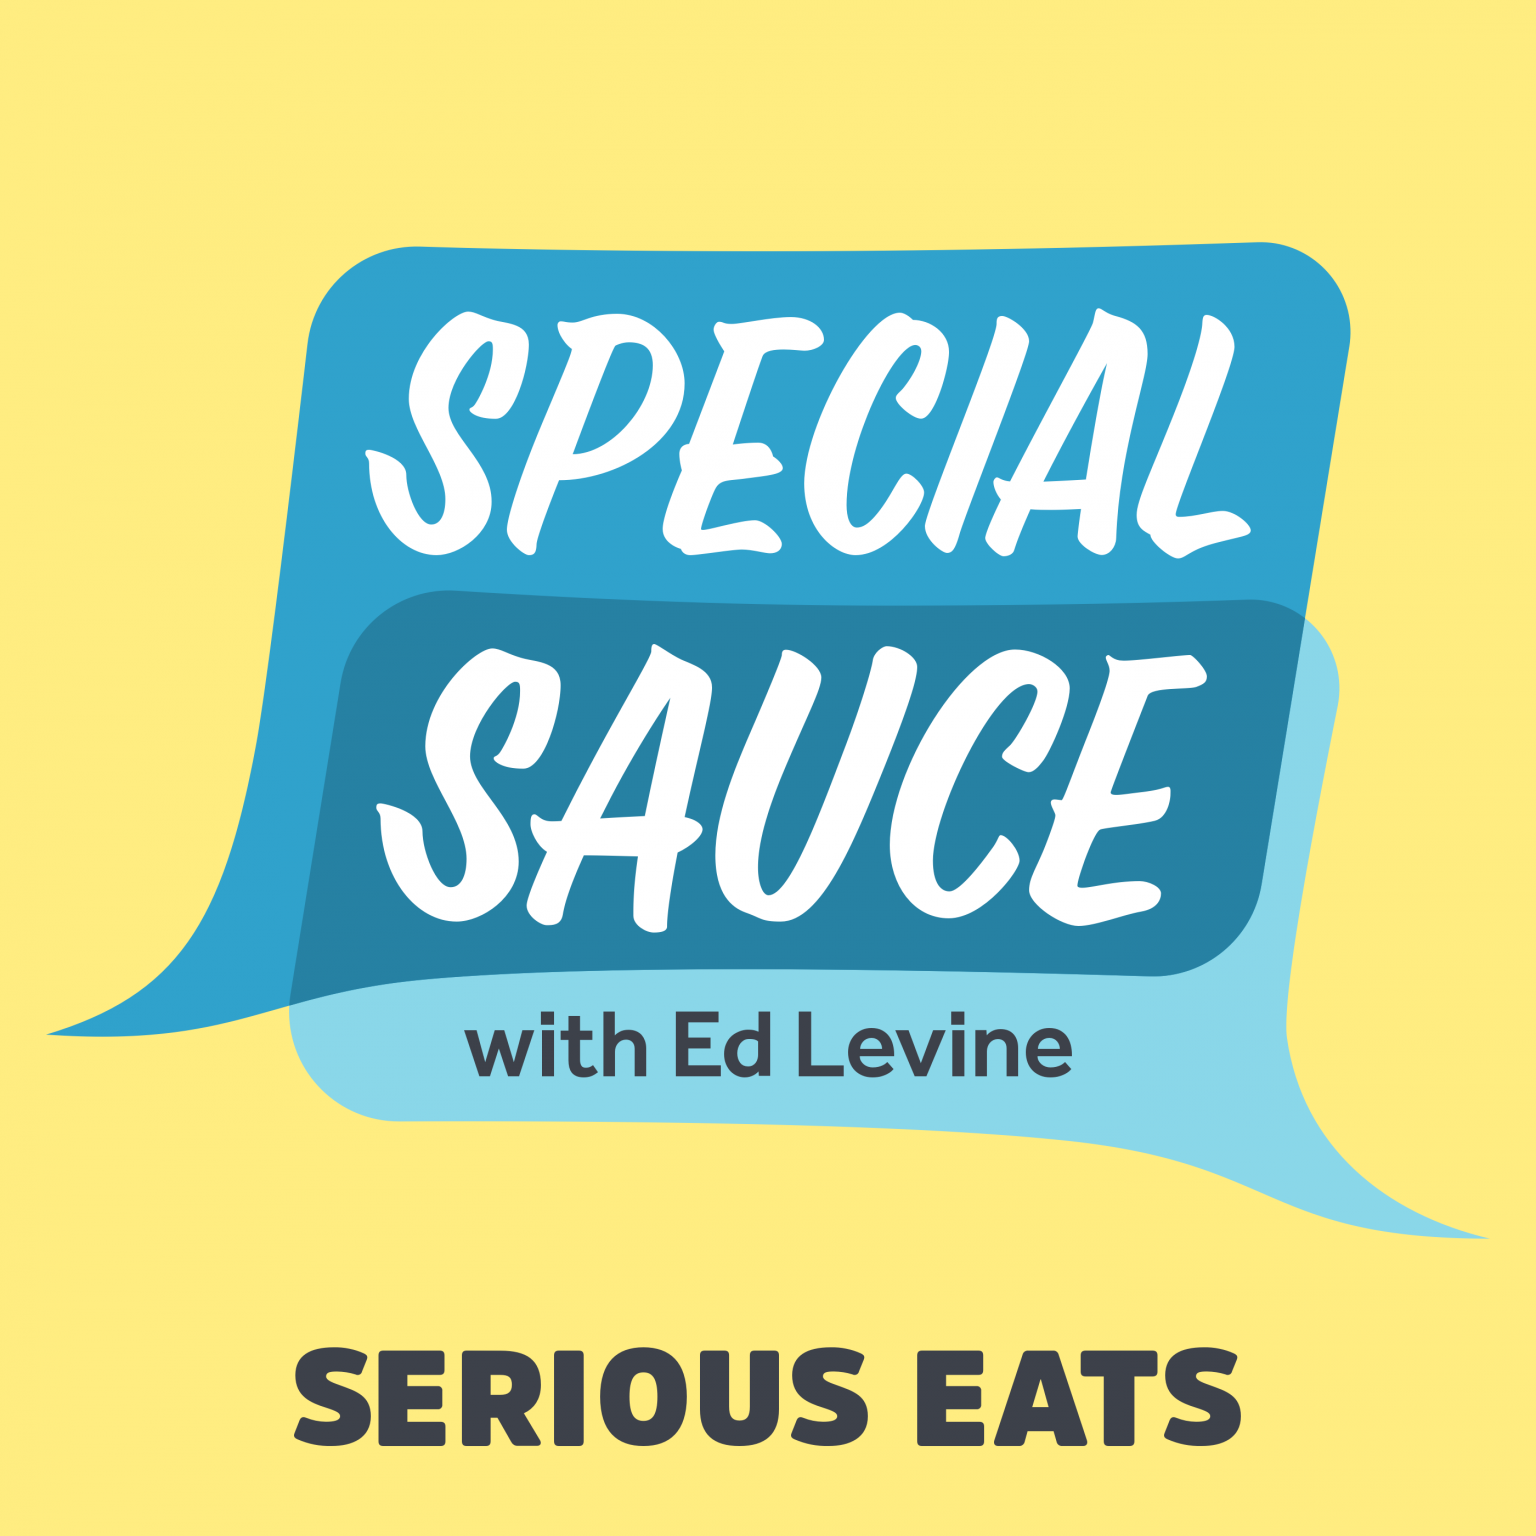 Special Sauce: Matt Rodbard and Max Falkowitz on What's Next in Food Media [2/2]